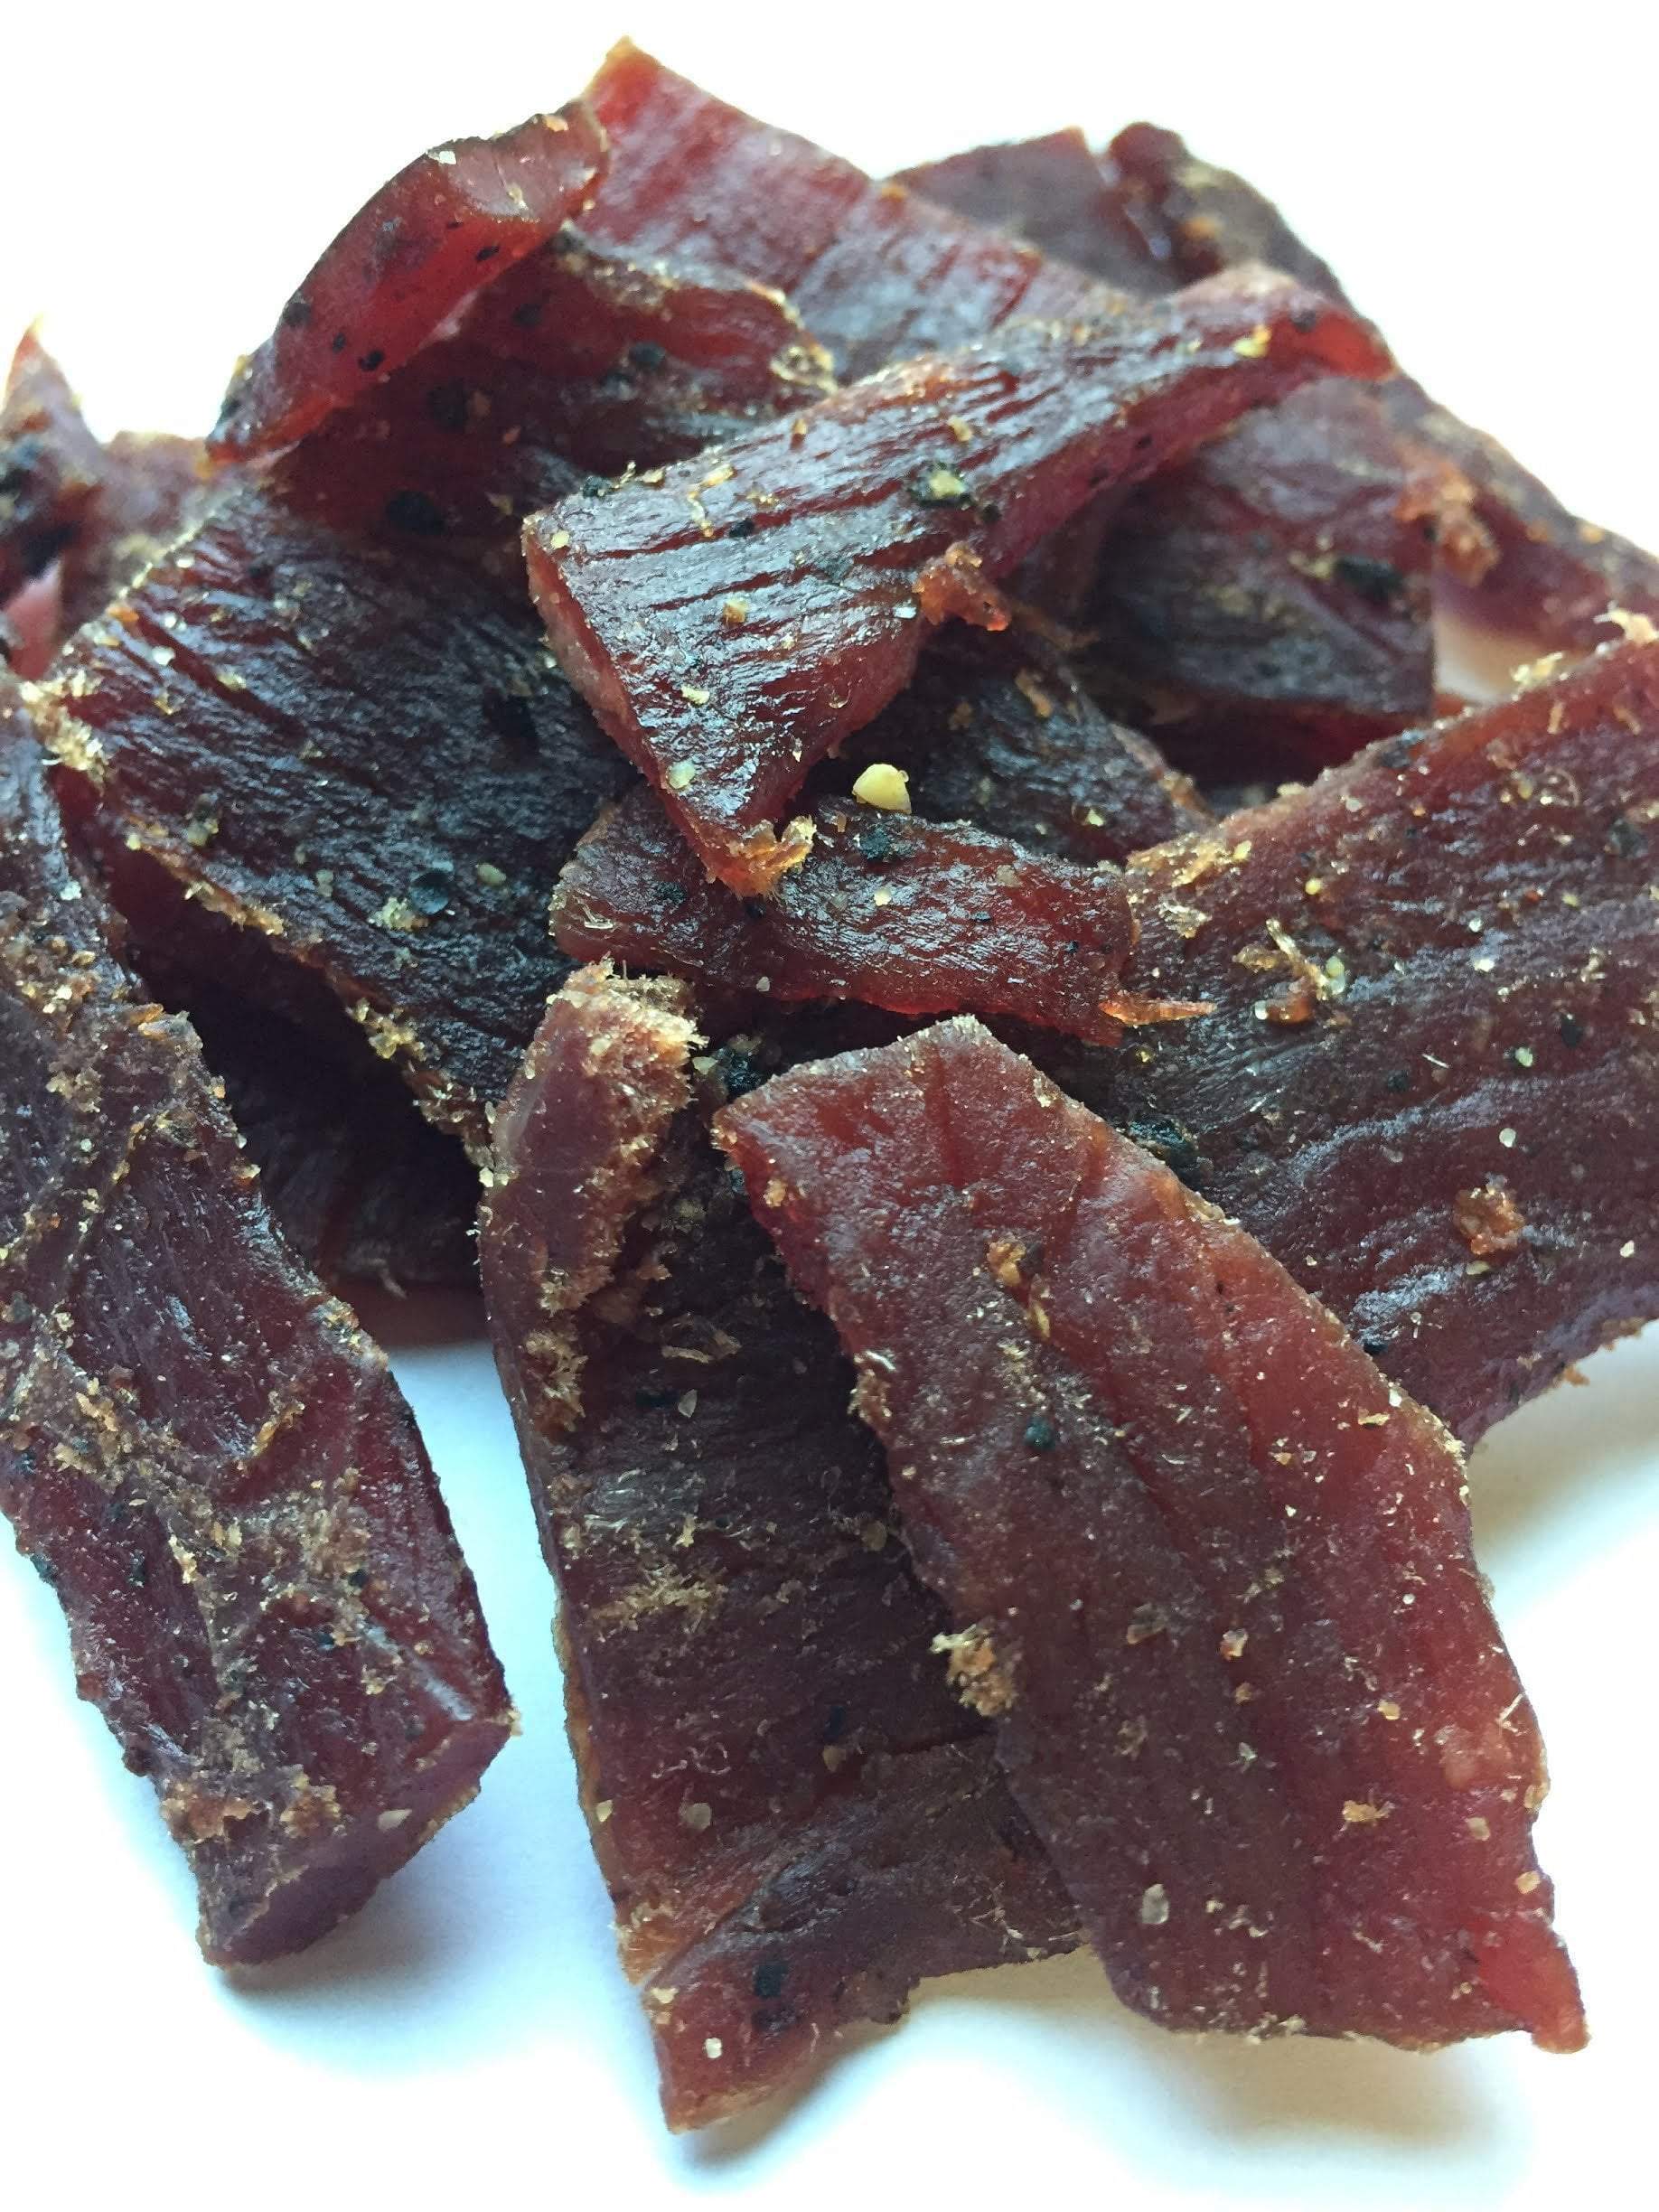 Soft and Tender Style Beef Jerky - Honey Pepper by Bricktown Jerky